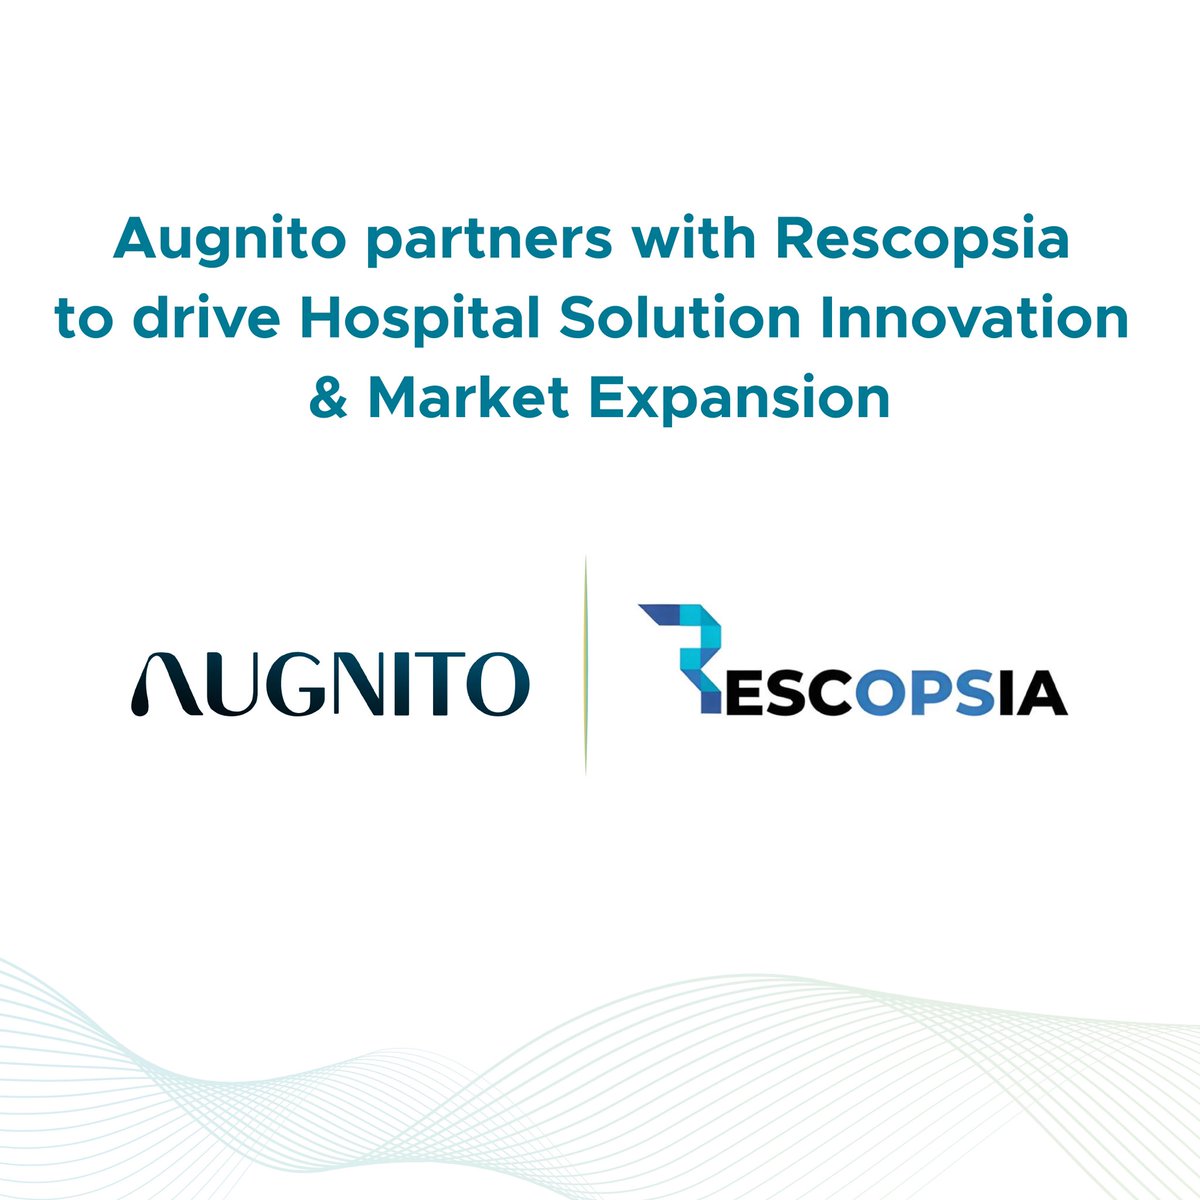 Breaking News! 🚀 We're super delighted to unveil our partnership with Rescopsia in Malaysia! 🎉 This exciting collaboration marks a significant milestone in our shared mission to redefine healthcare through cutting-edge technology. #Augnito #Rescopsia #Partnership